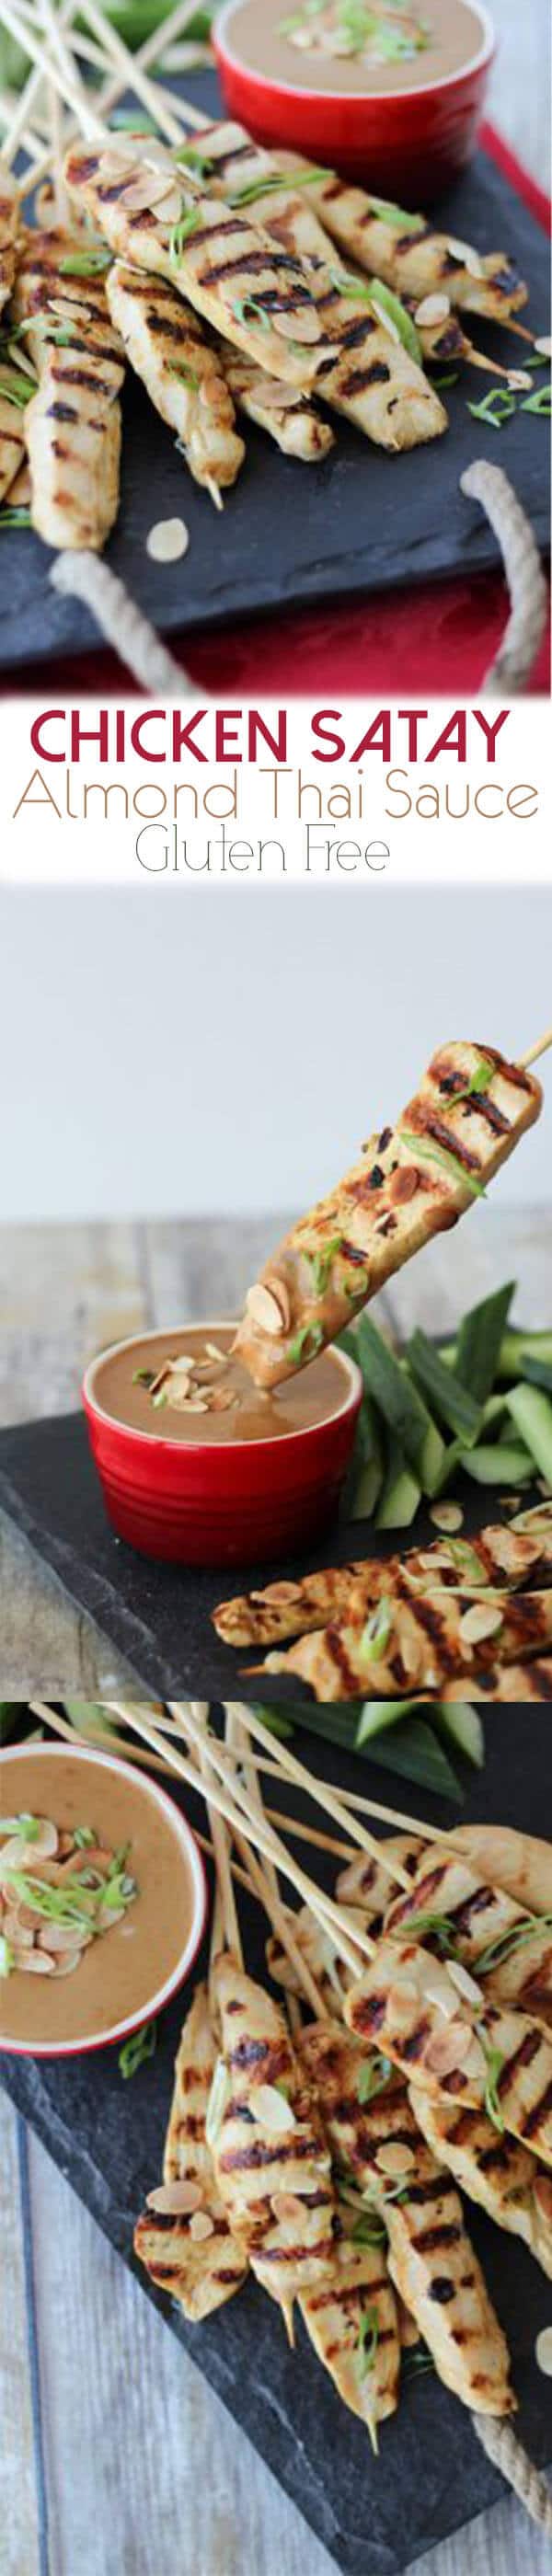 An image of a serving platter of multiple chicken satay dipping into a bowl of thai almond sauce.